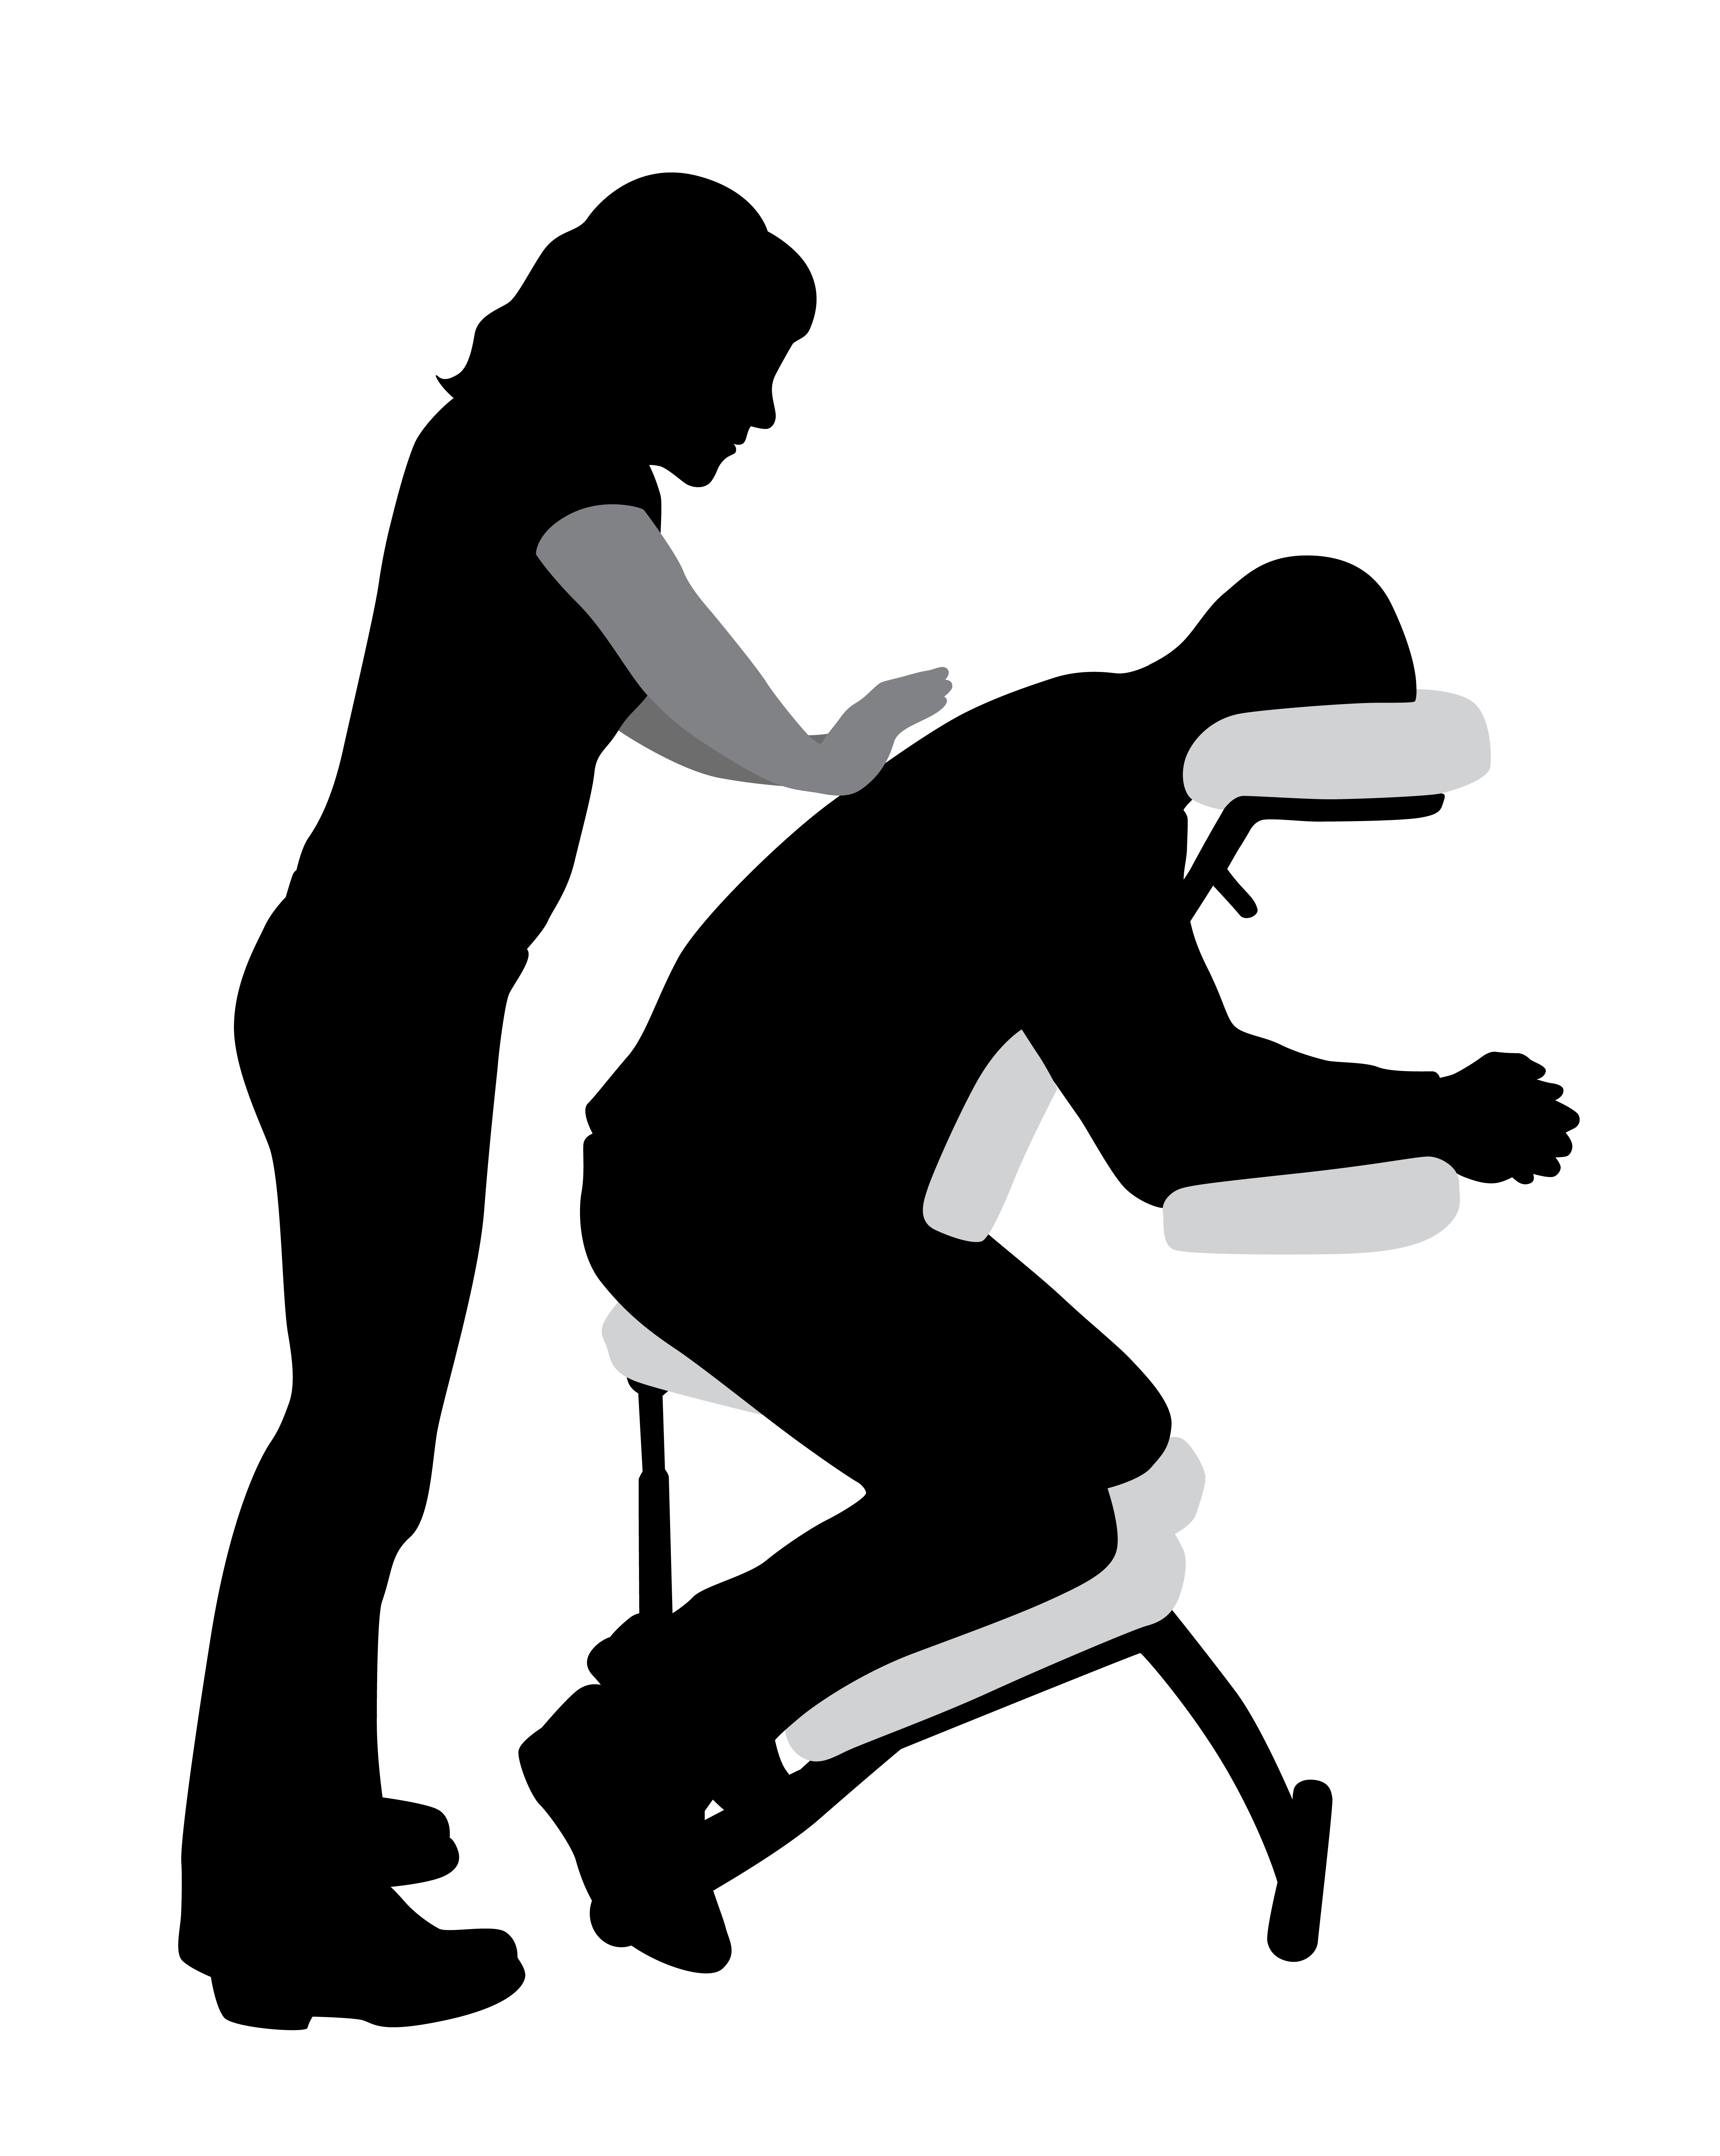 Massage Therapy Hd Image Clipart